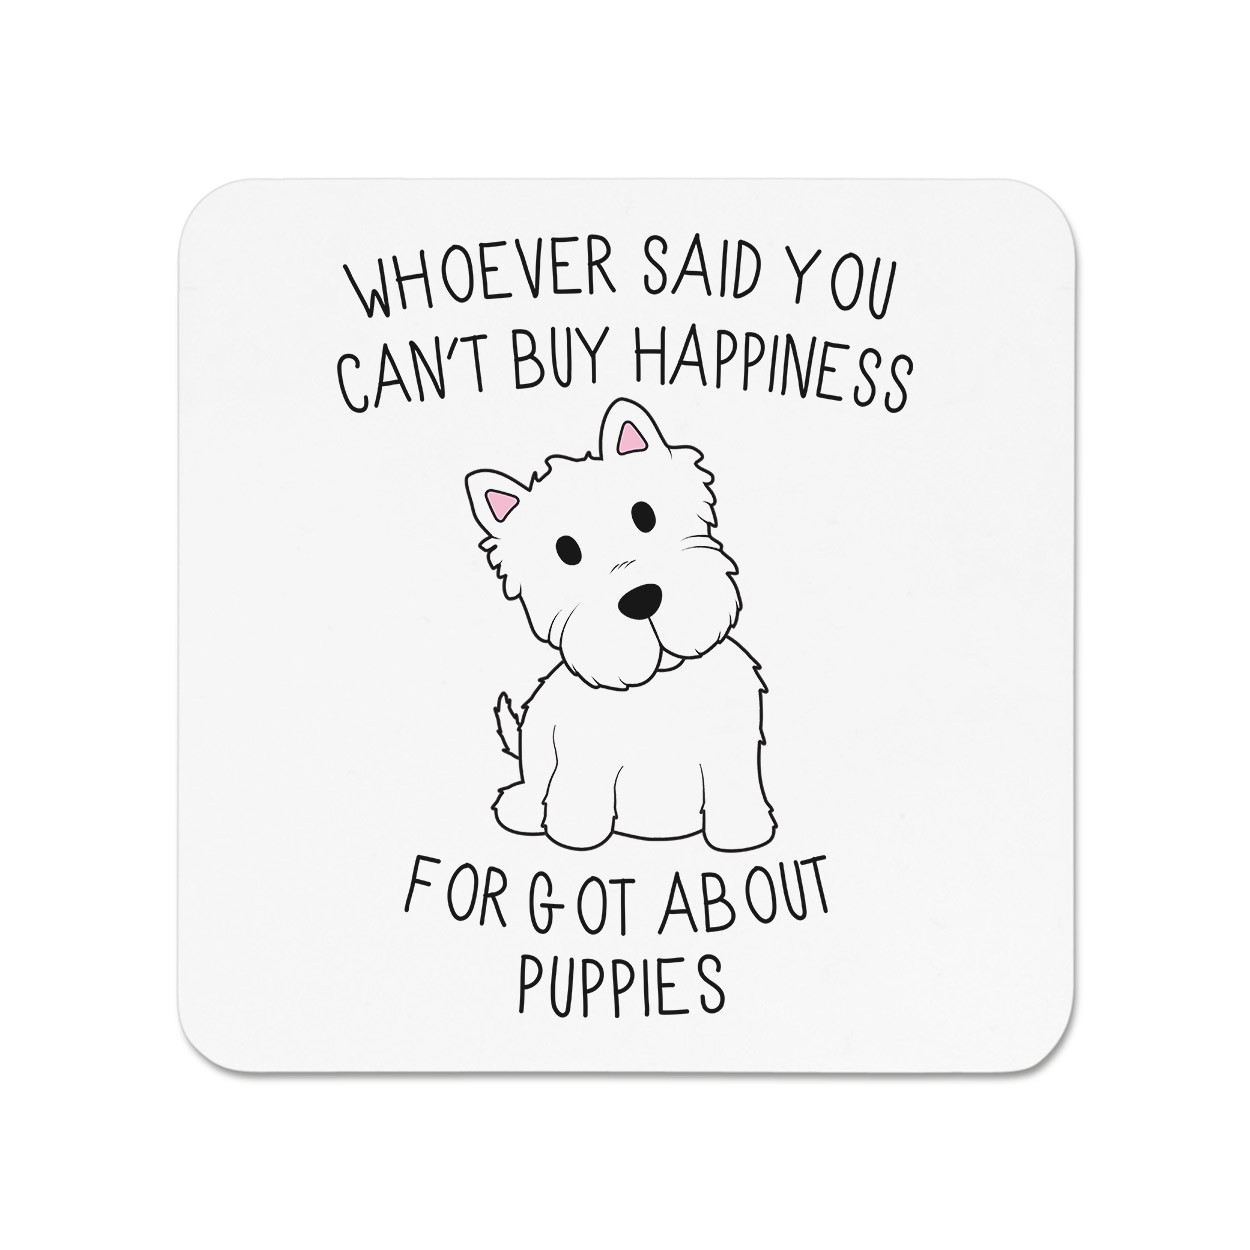 Whoever Said You Can't Buy Happiness Forgot About Puppies Fridge Magnet